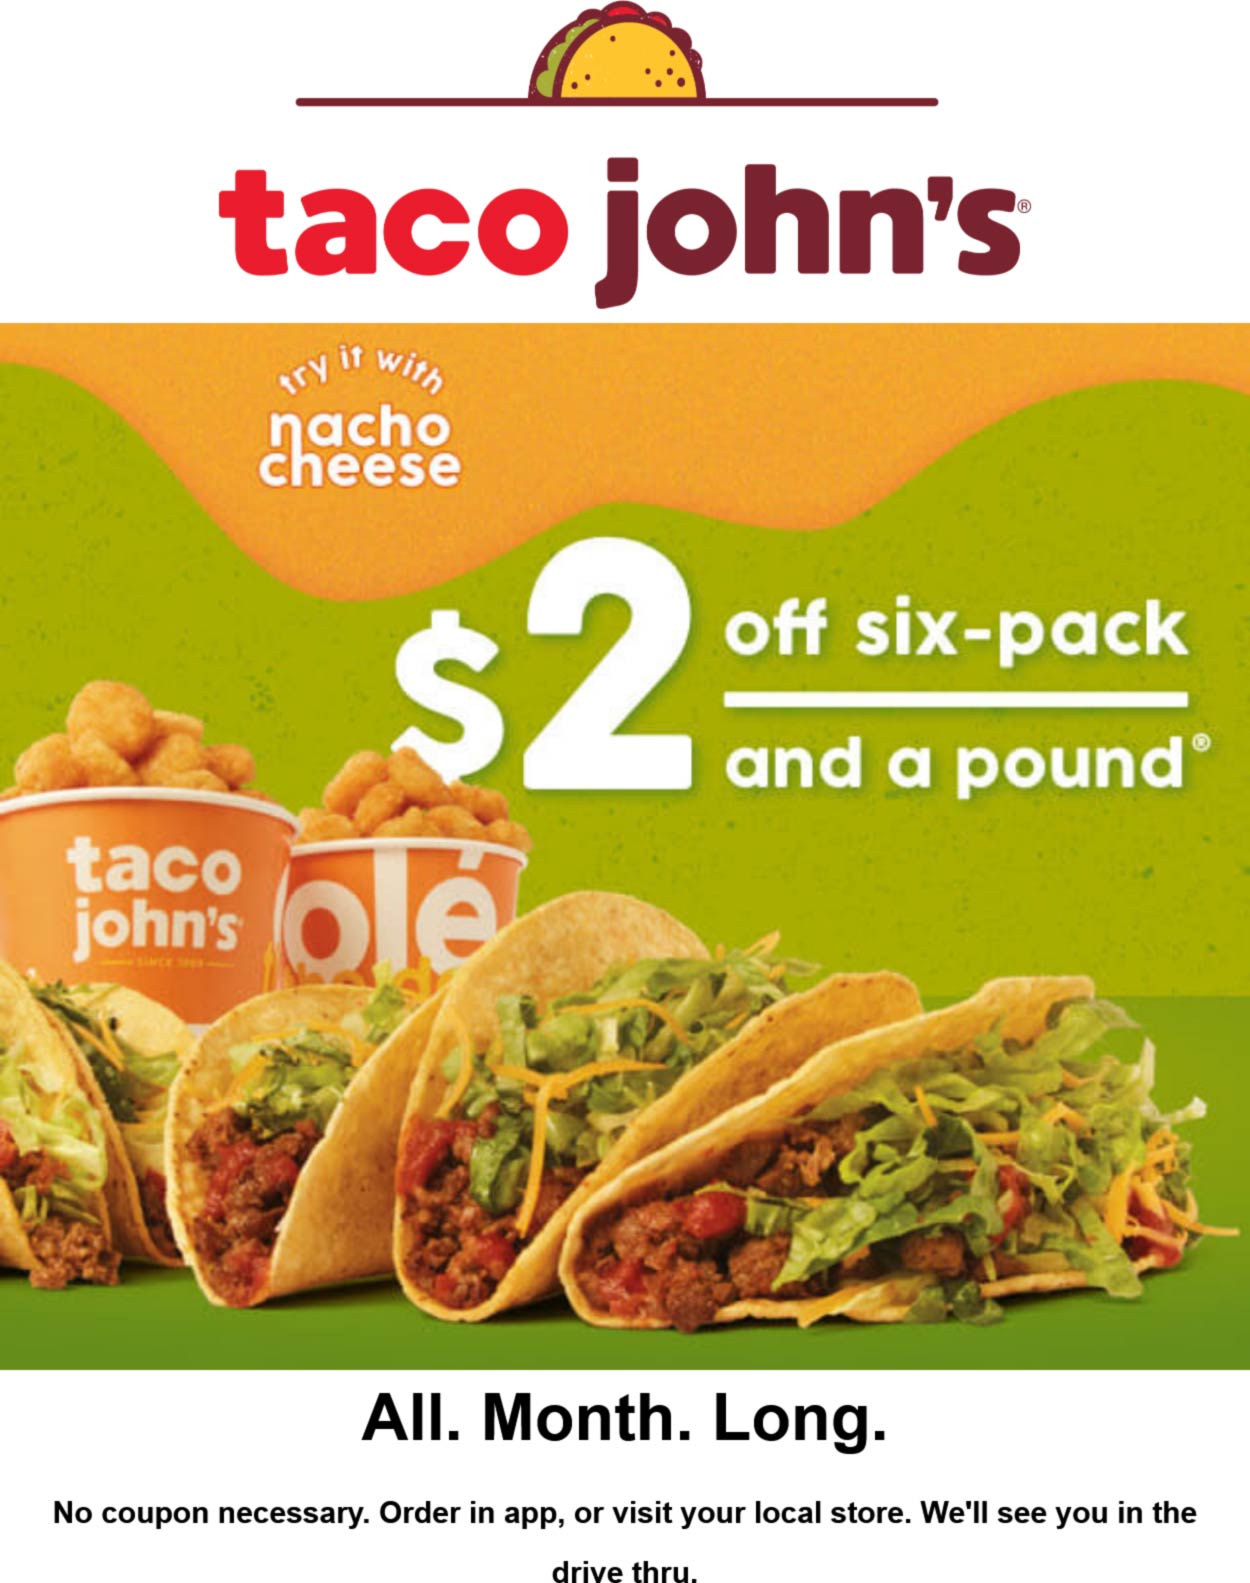 2 off six pack & pound all month at Taco Johns restaurants tacojohns